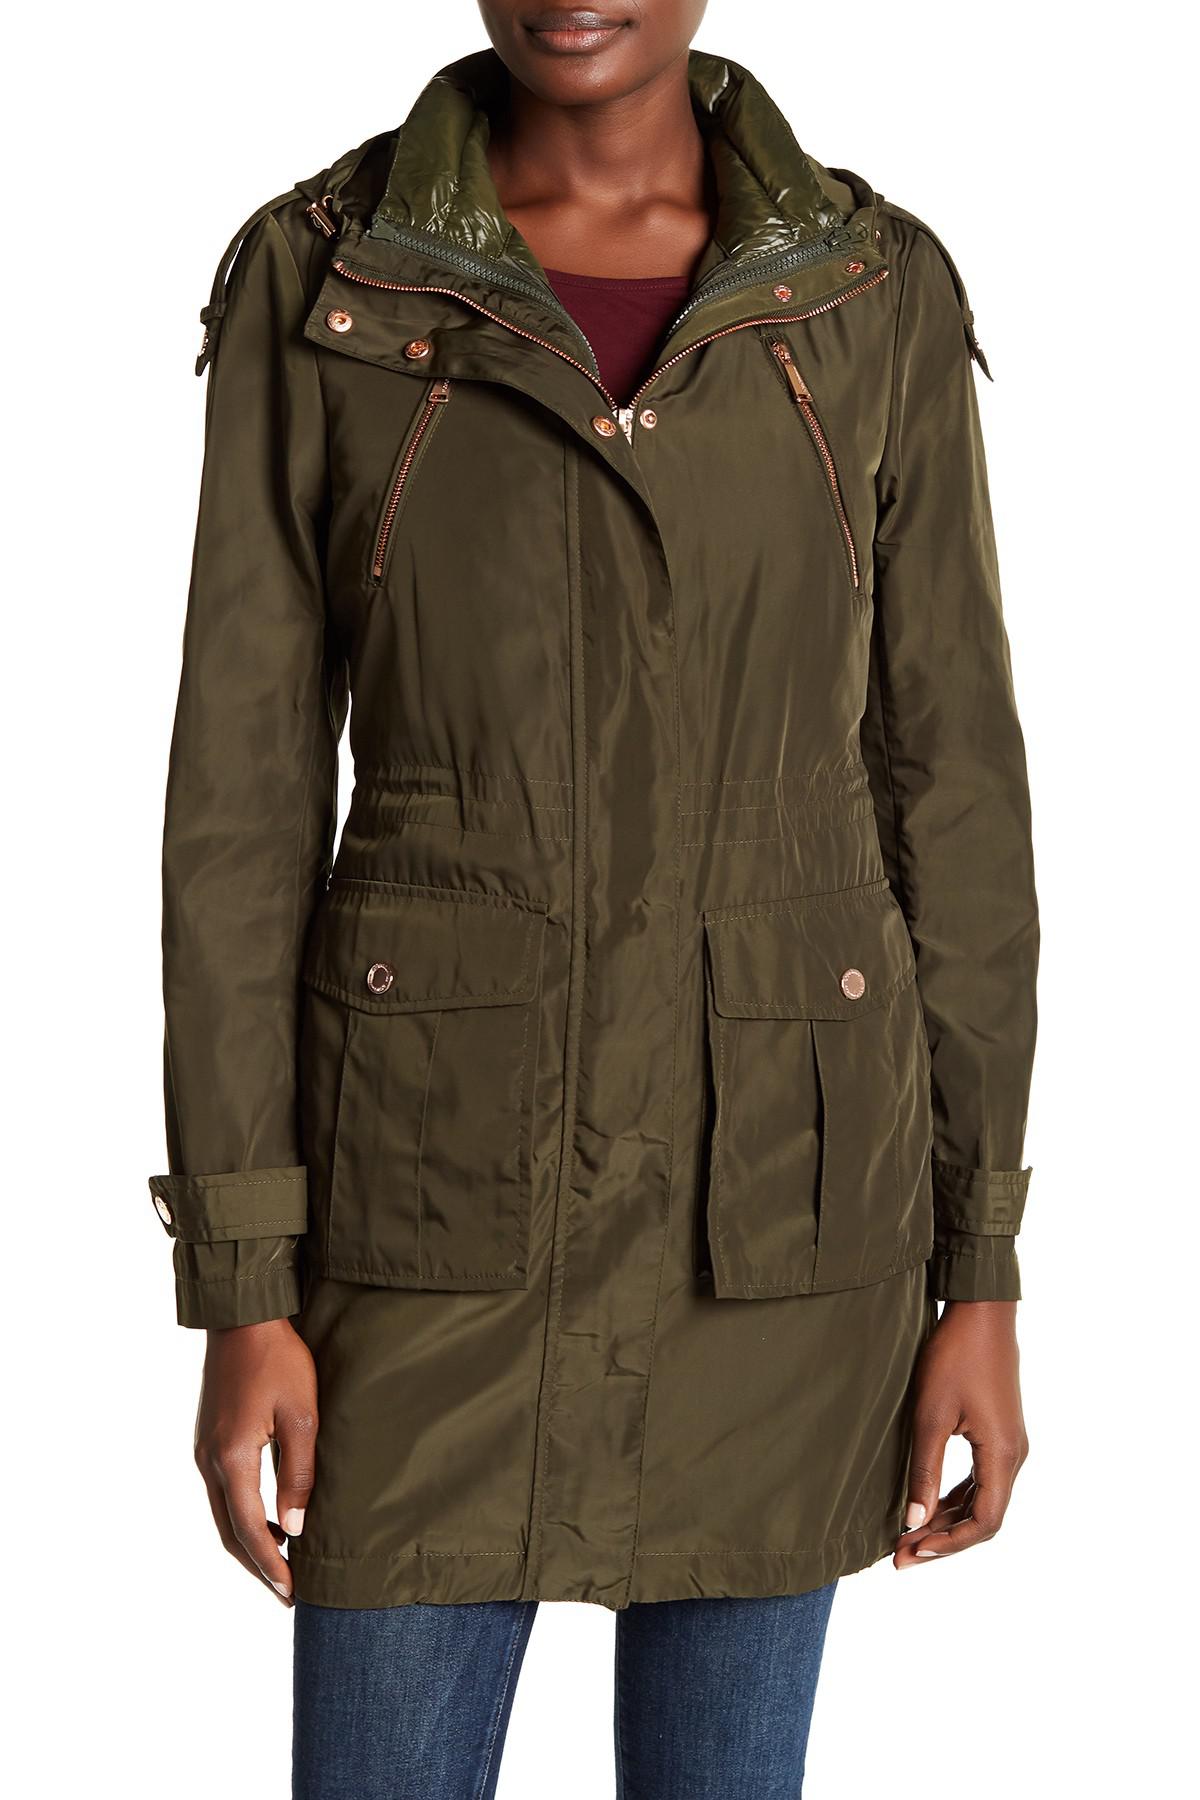 BCBGeneration Synthetic Anorak Down Vest Jacket in Olive (Green) - Lyst